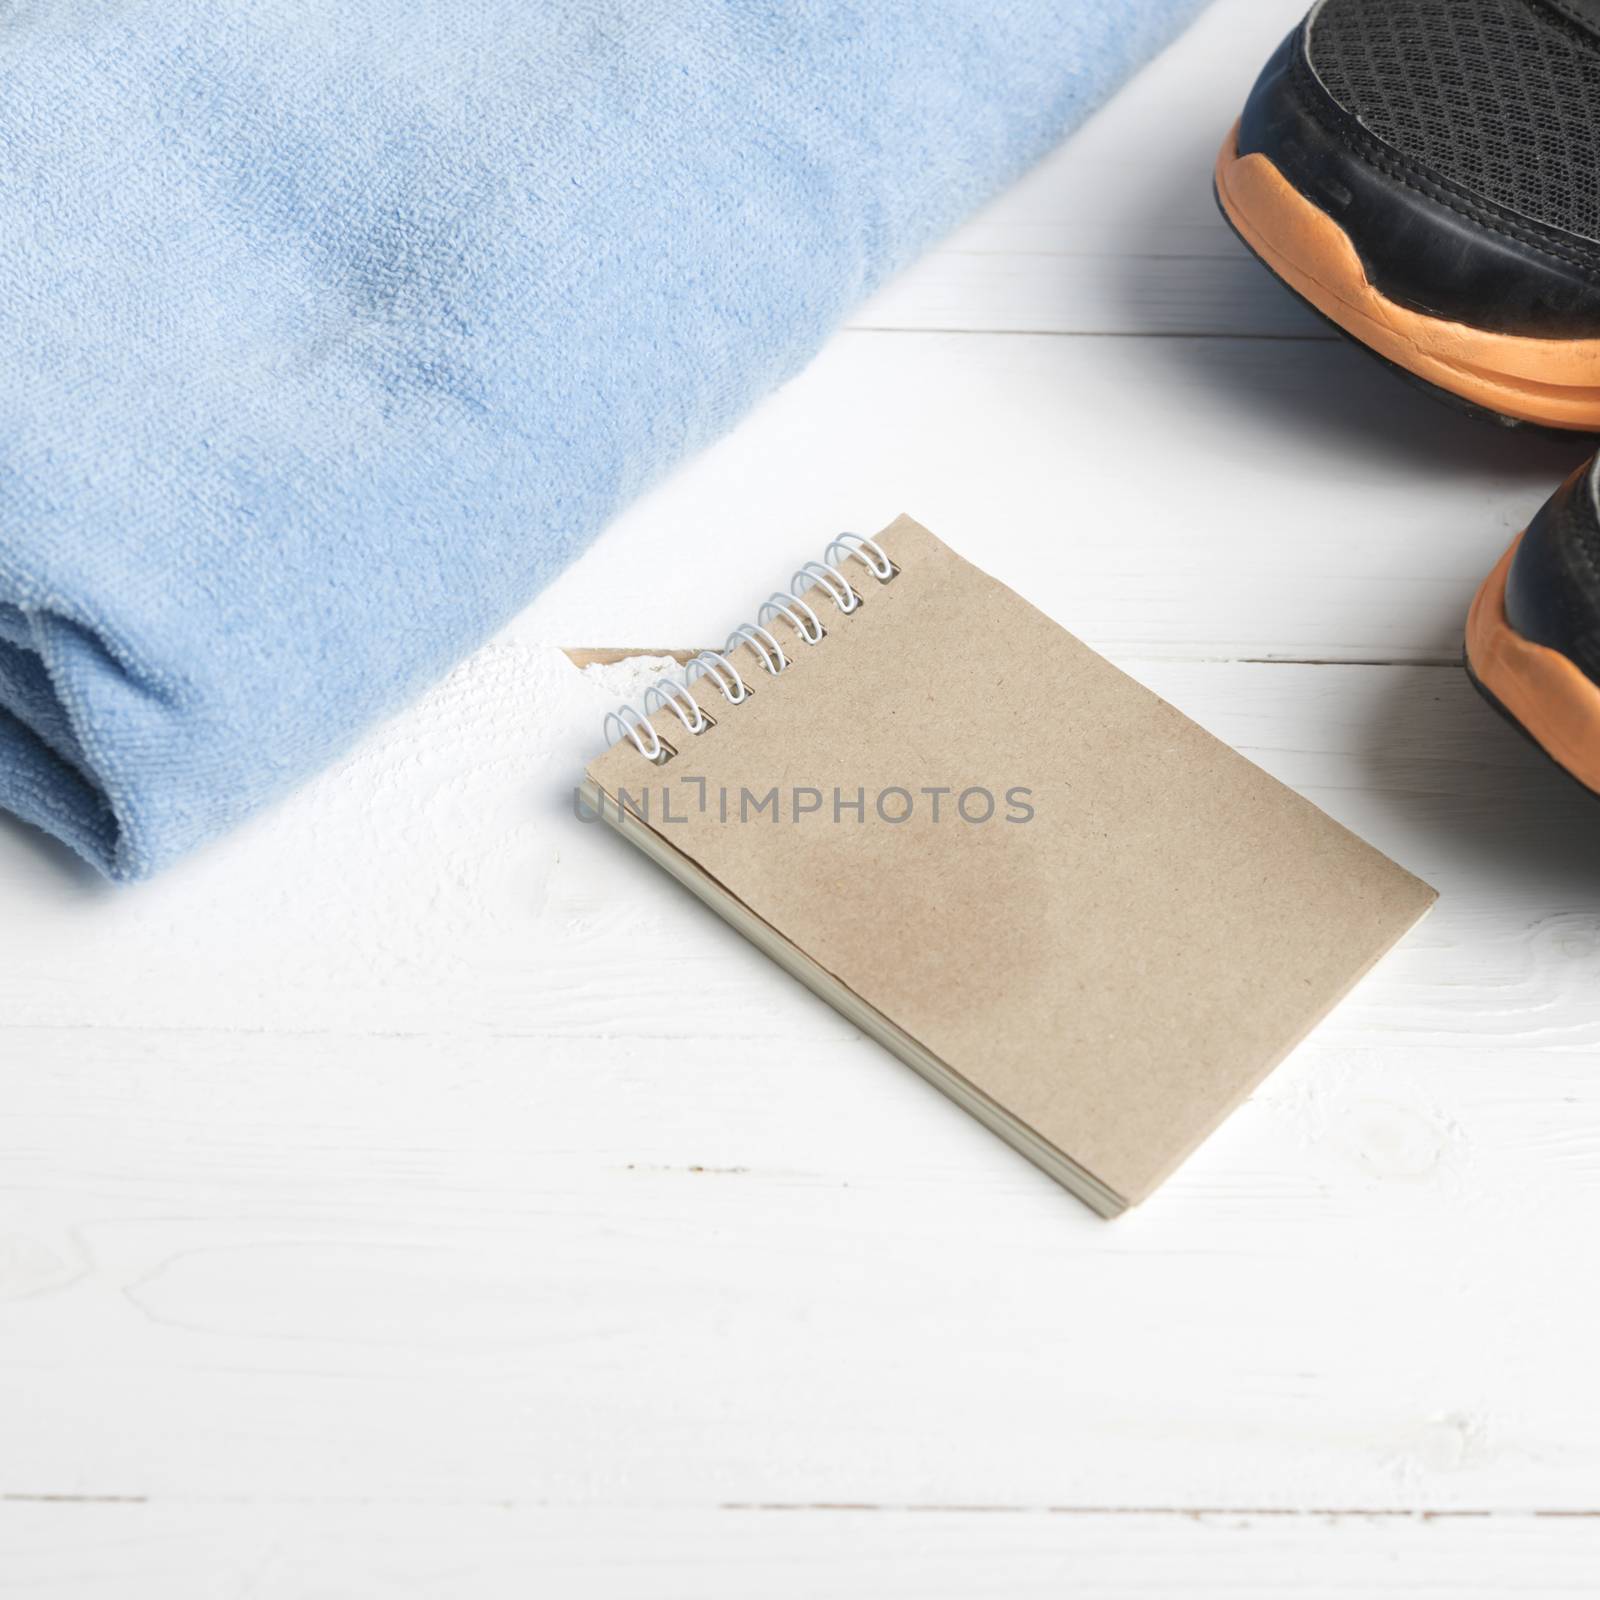 fitness equipment : running shoes,blue towel and notepad on white wood table